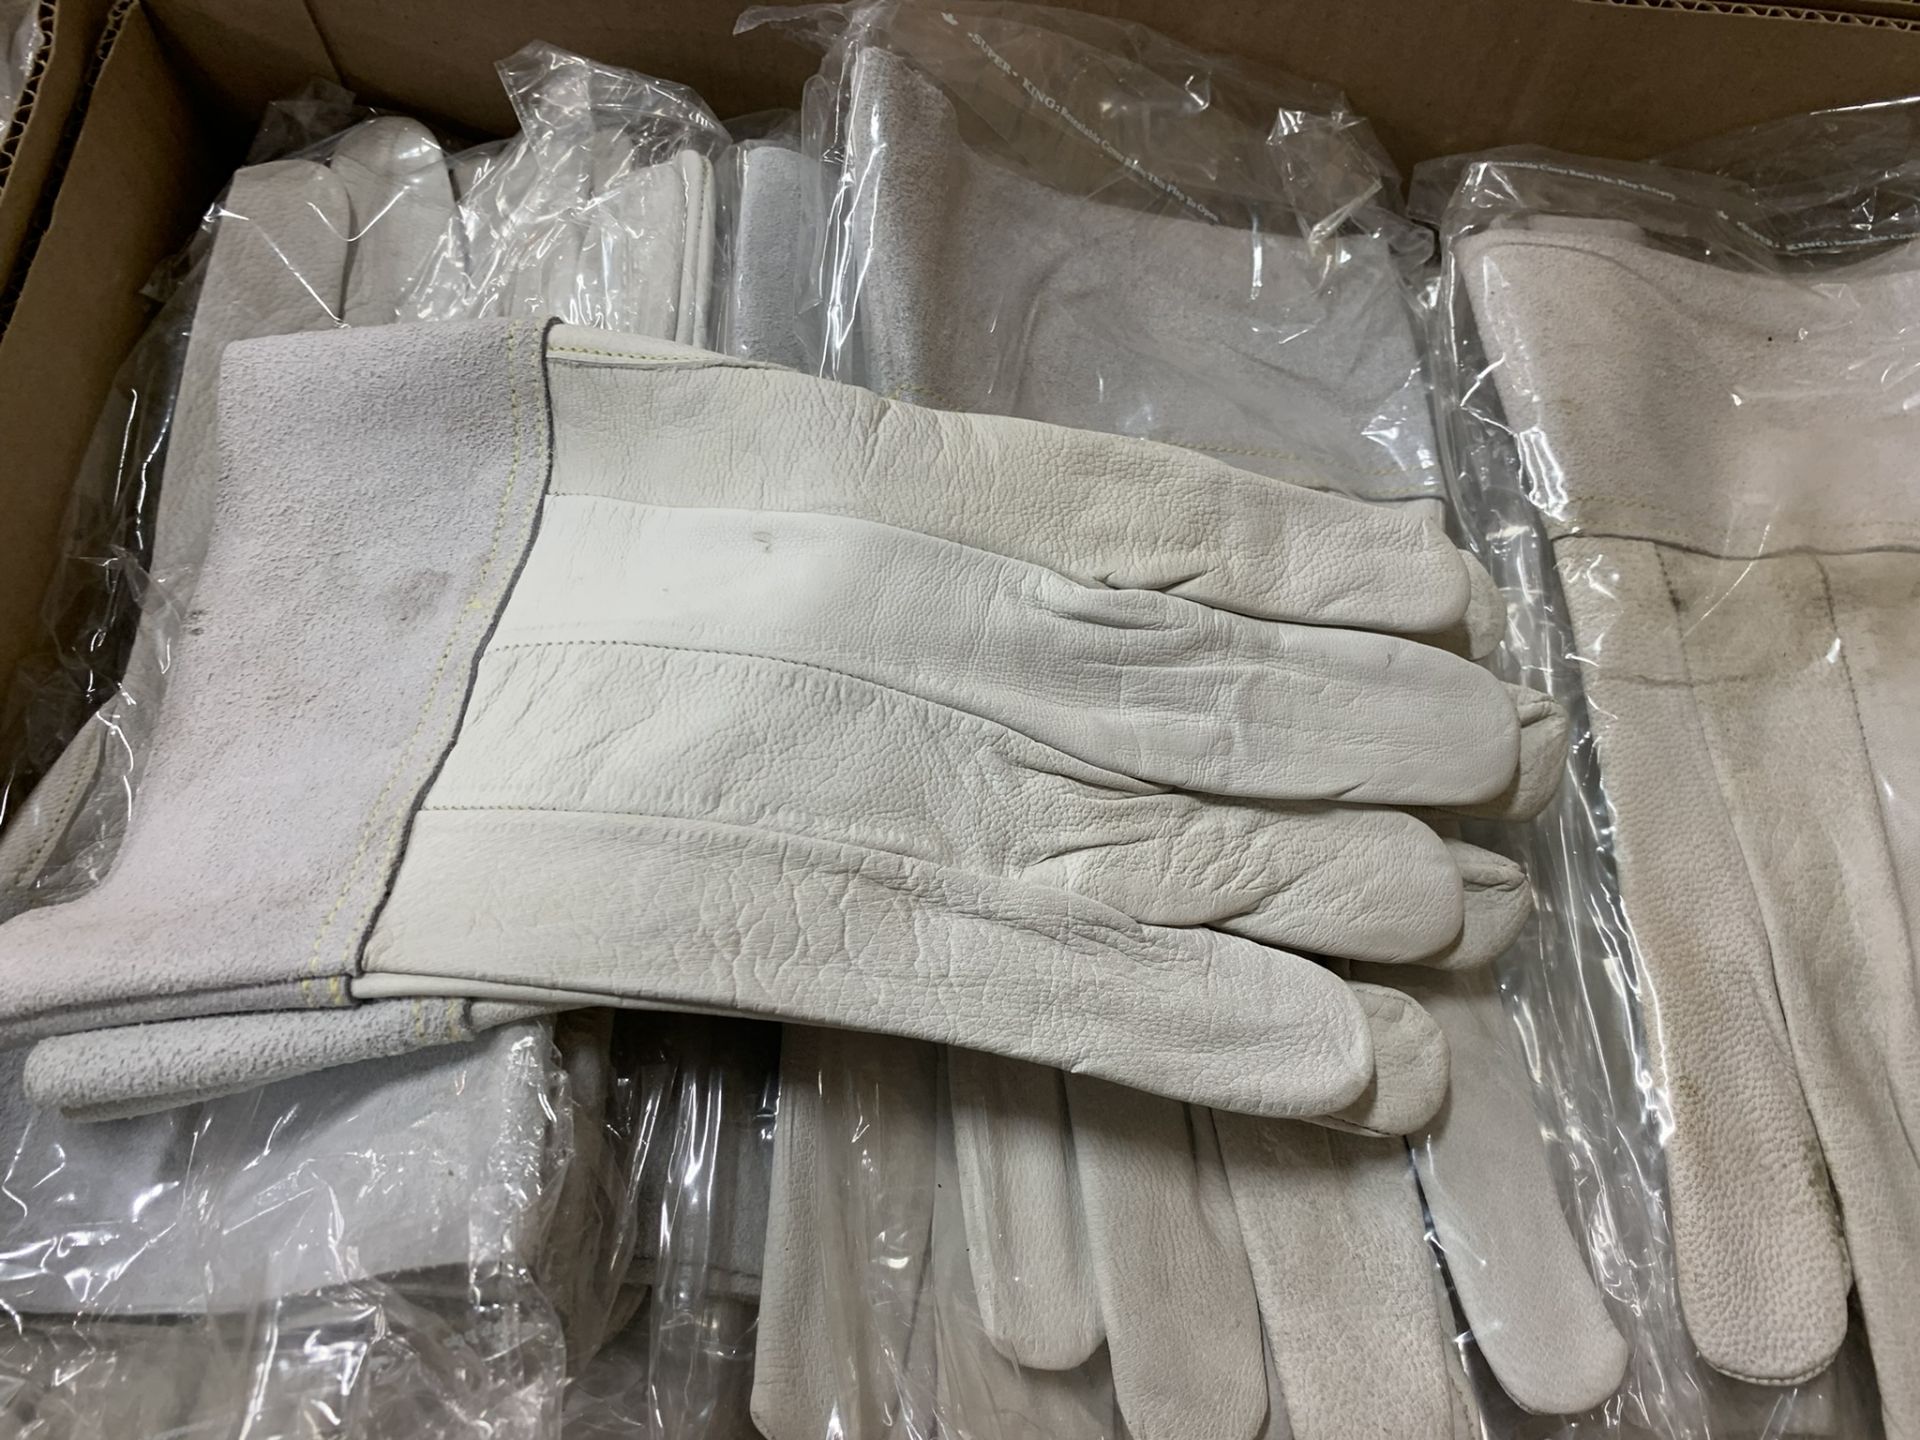 L/O LEATHER GLOVES - Image 2 of 2